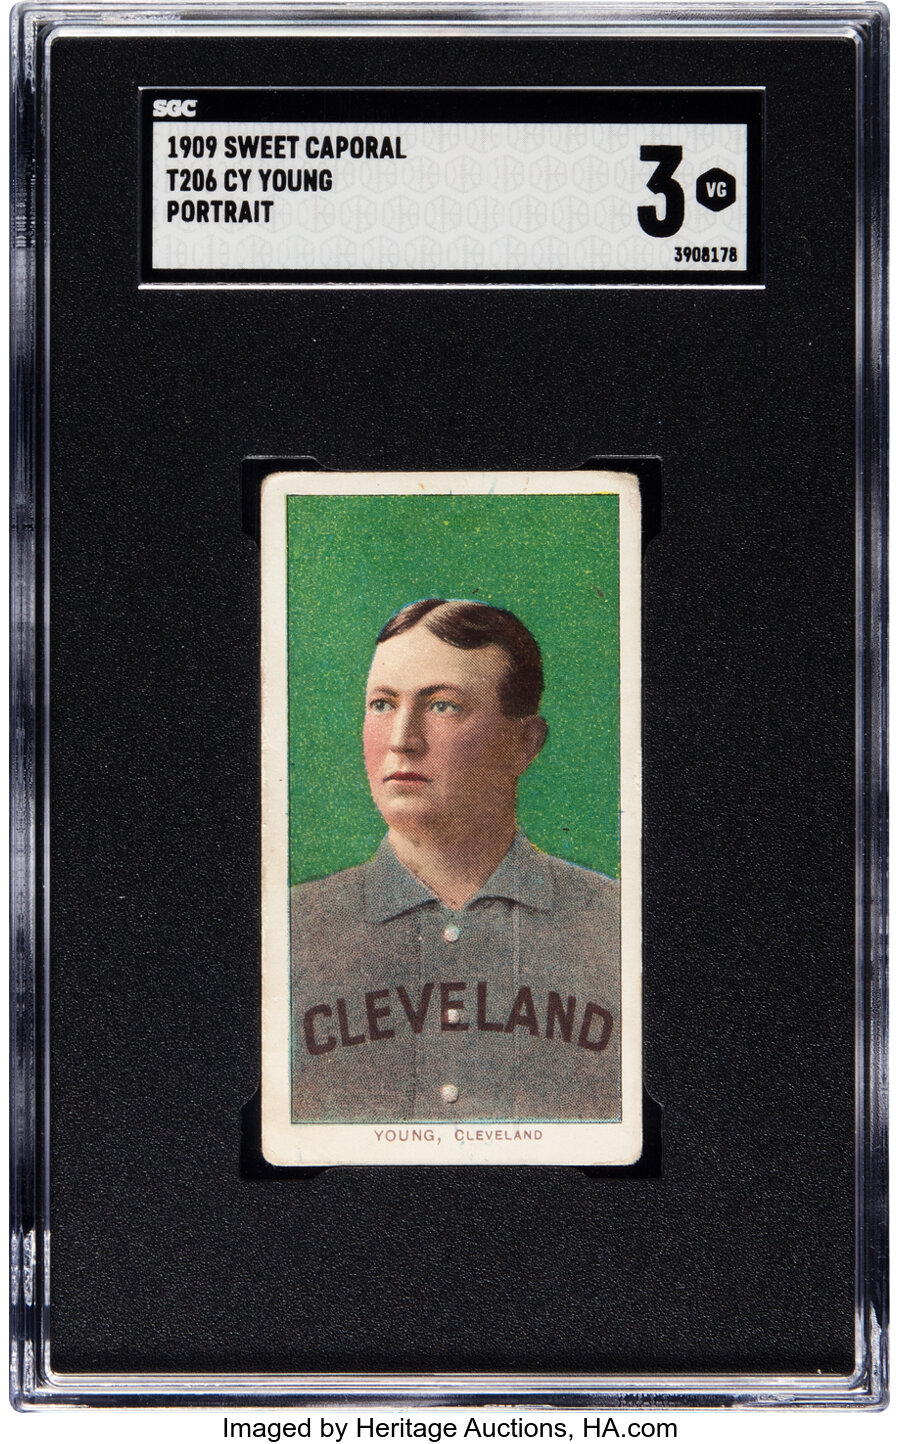 1909-11 T206 Sweet Caporal 150 Cy Young (Cleveland, Portrait) SGC VG 3